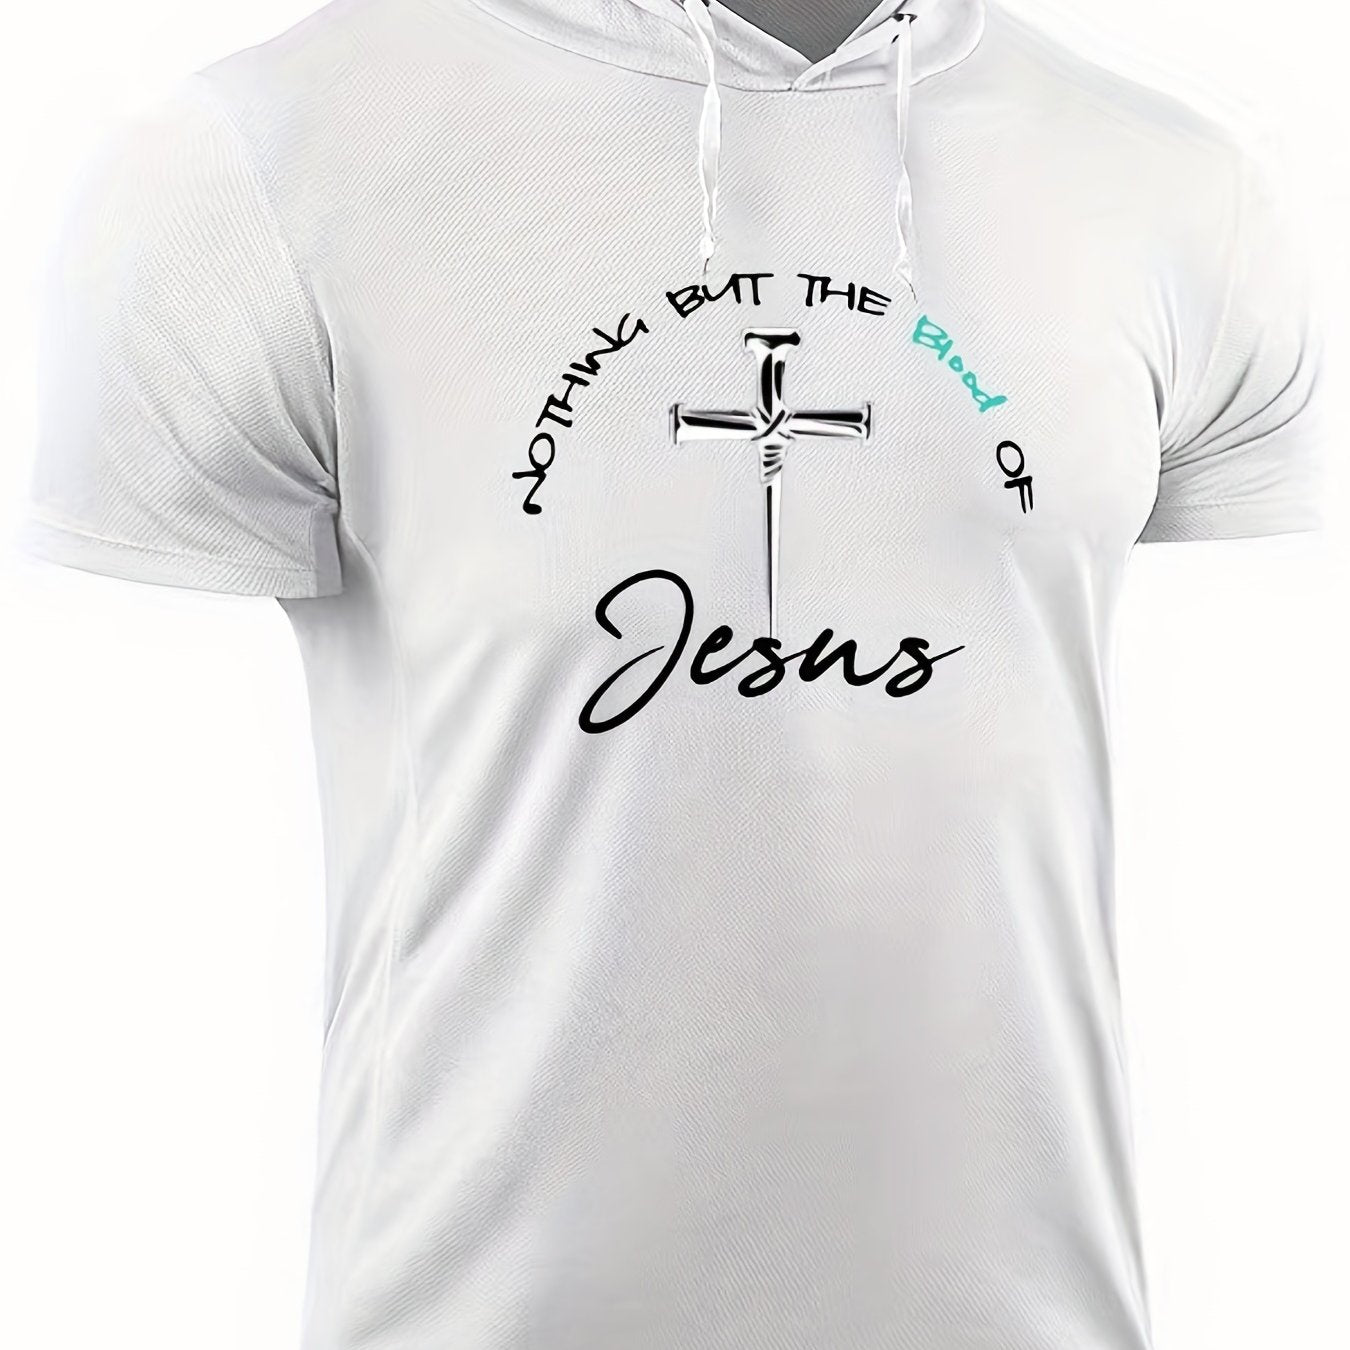 Nothing But The Blood Of Jesus Plus Size Men's Christian Hooded T-shirt claimedbygoddesigns